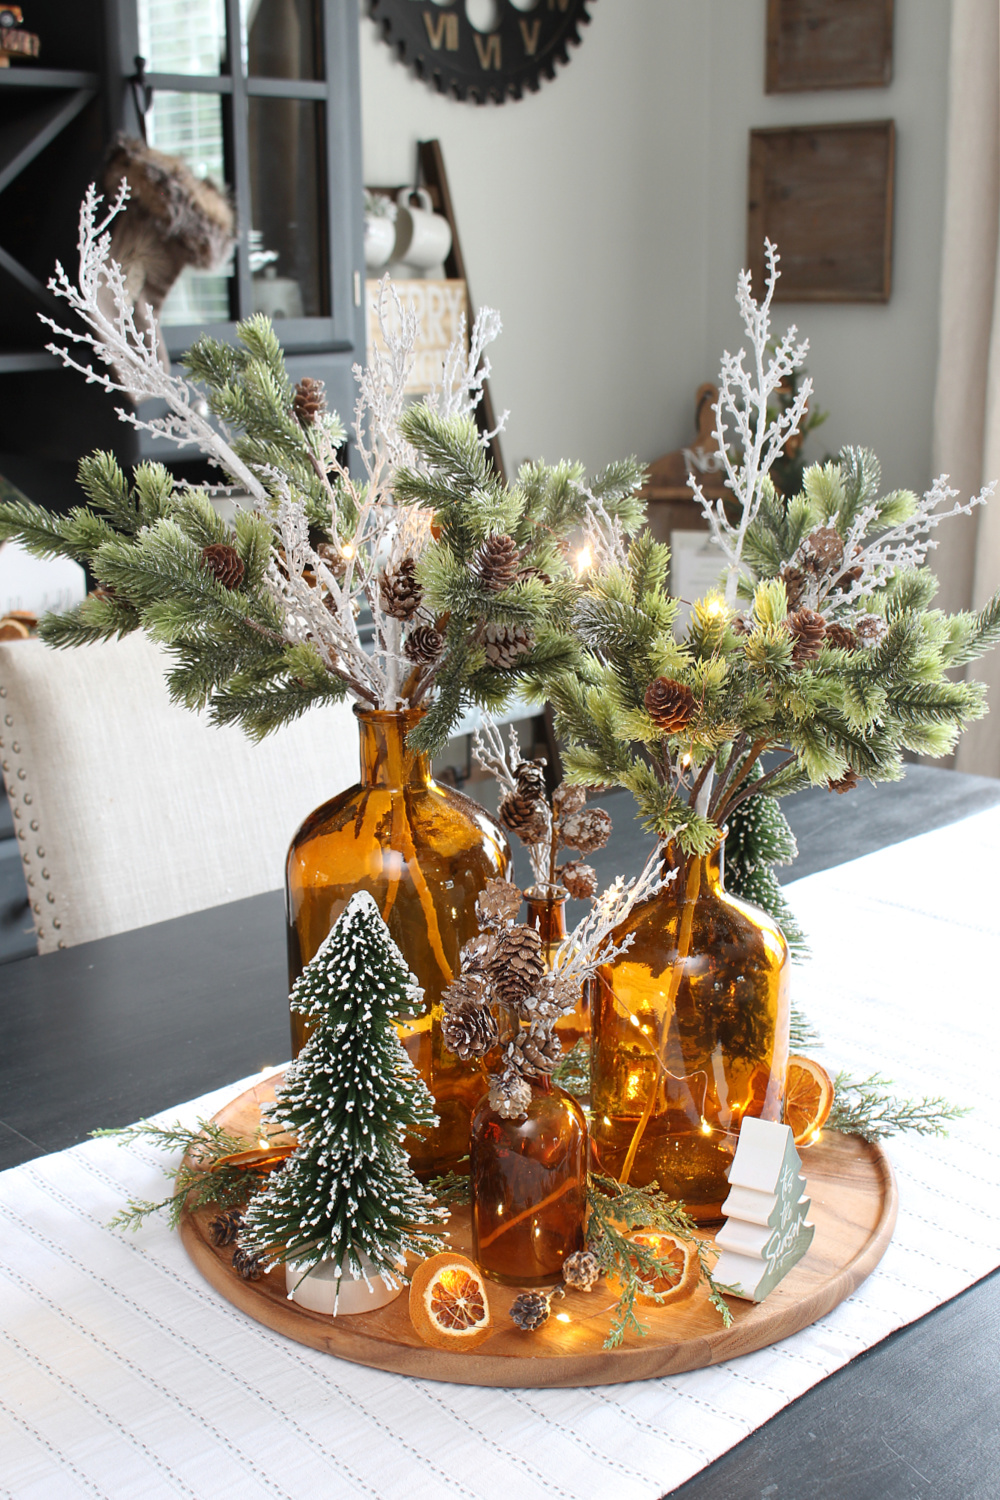 Pretty lighted Christmas centerpiece with amber glass bottles and greenery.